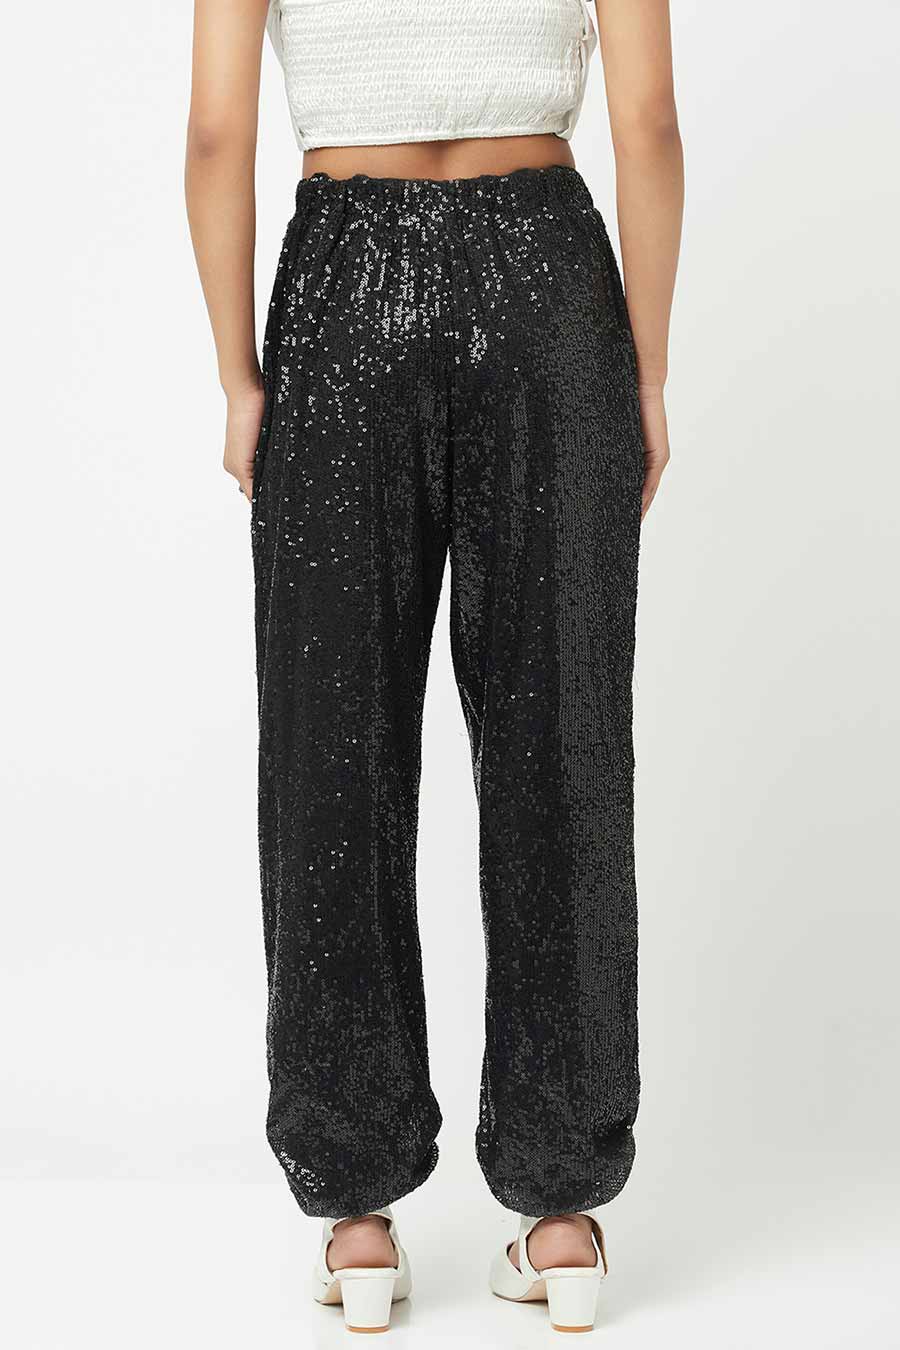 Black Sequined Jogger Pants